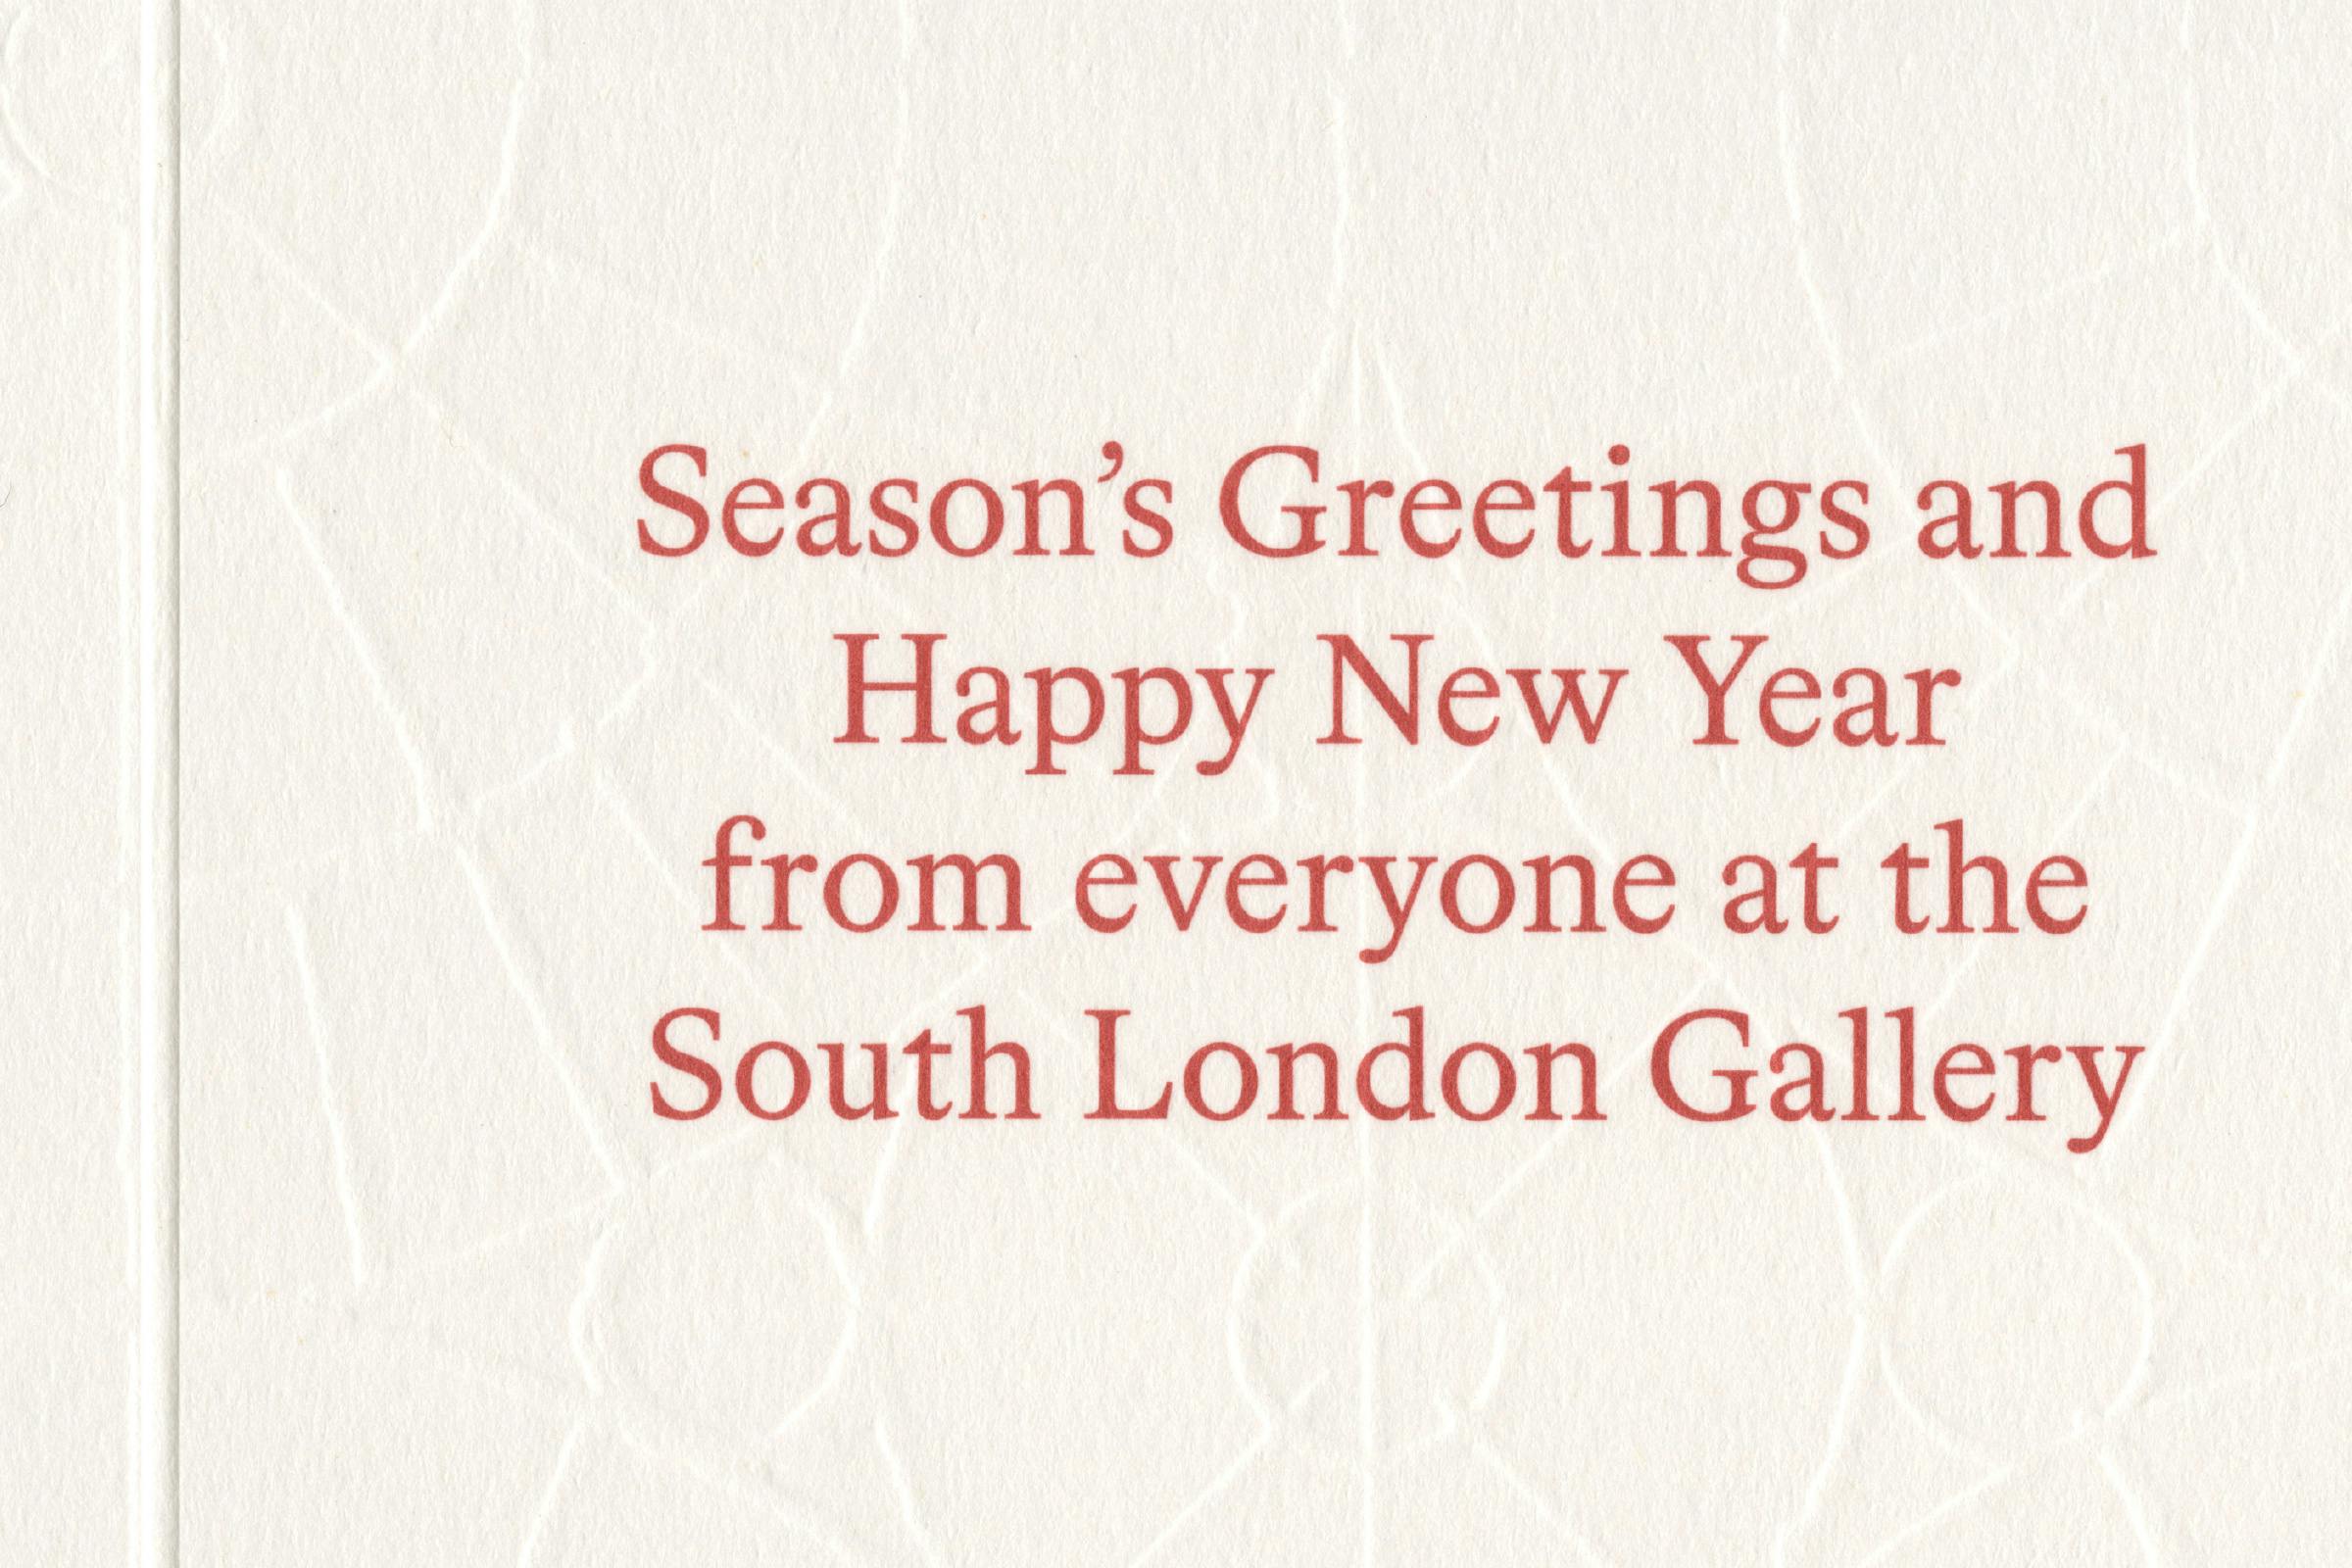 Christmas Card, South London Gallery, Gabriel Orozco, Graphic Design by Wolfe Hall